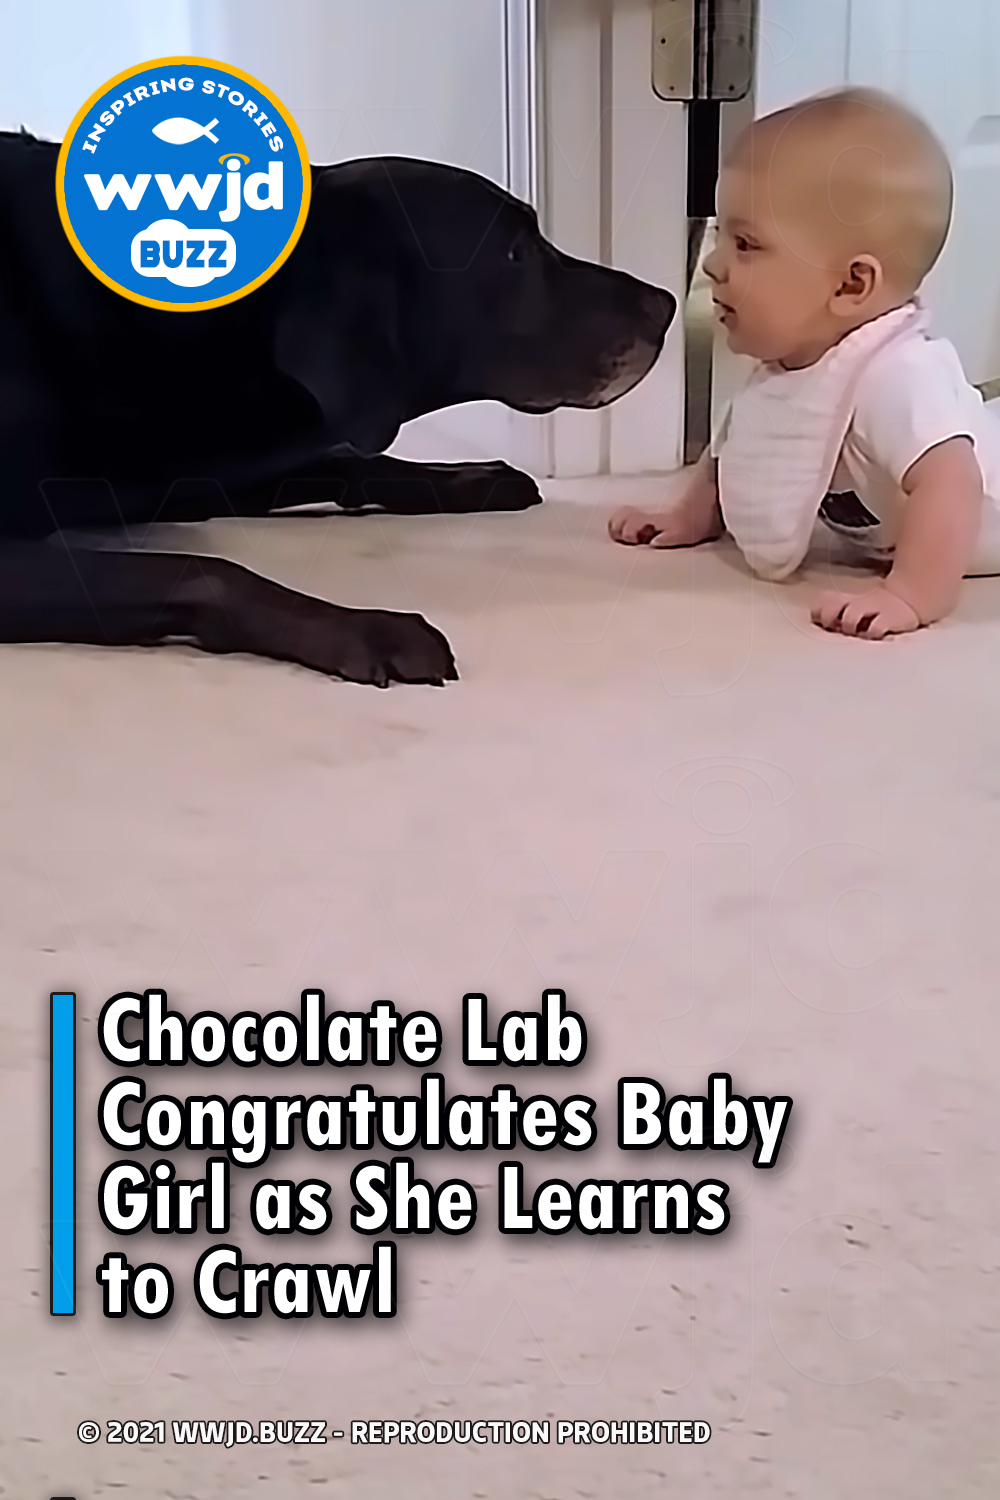 Chocolate Lab Congratulates Baby Girl as She Learns to Crawl